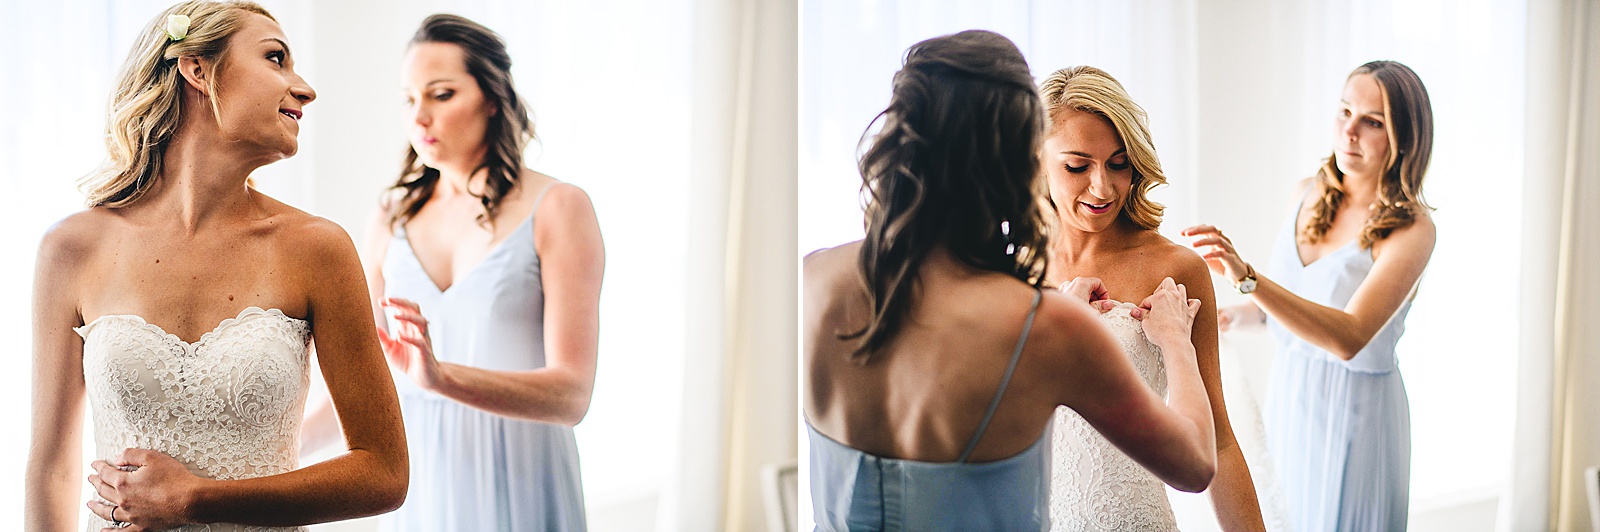 12 bride getting dressed - Audrey + Jake's Beautiful Chicago Wedding at Chez